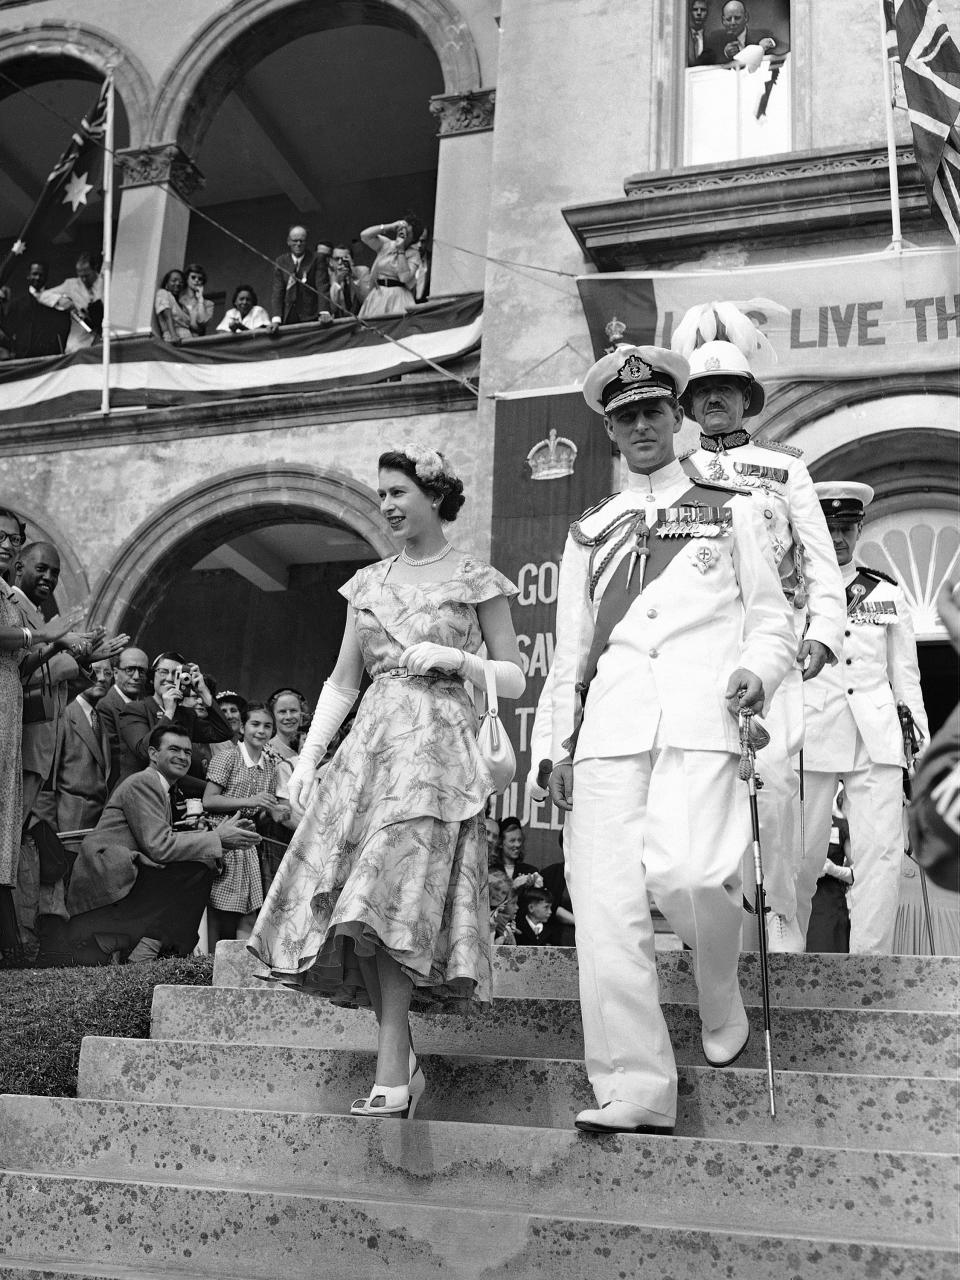 FILE - In this Nov. 25, 1953 file photo, Britain's Queen Elizabeth II with her husband, the Duke of Edinburgh, leave the House Of Assembly after the Queen addressed Bermuda's Colonial Parliament, in Hamilton, Bermuda. Buckingham Palace says Prince Philip, husband of Queen Elizabeth II, has died aged 99. (AP Photo/File)